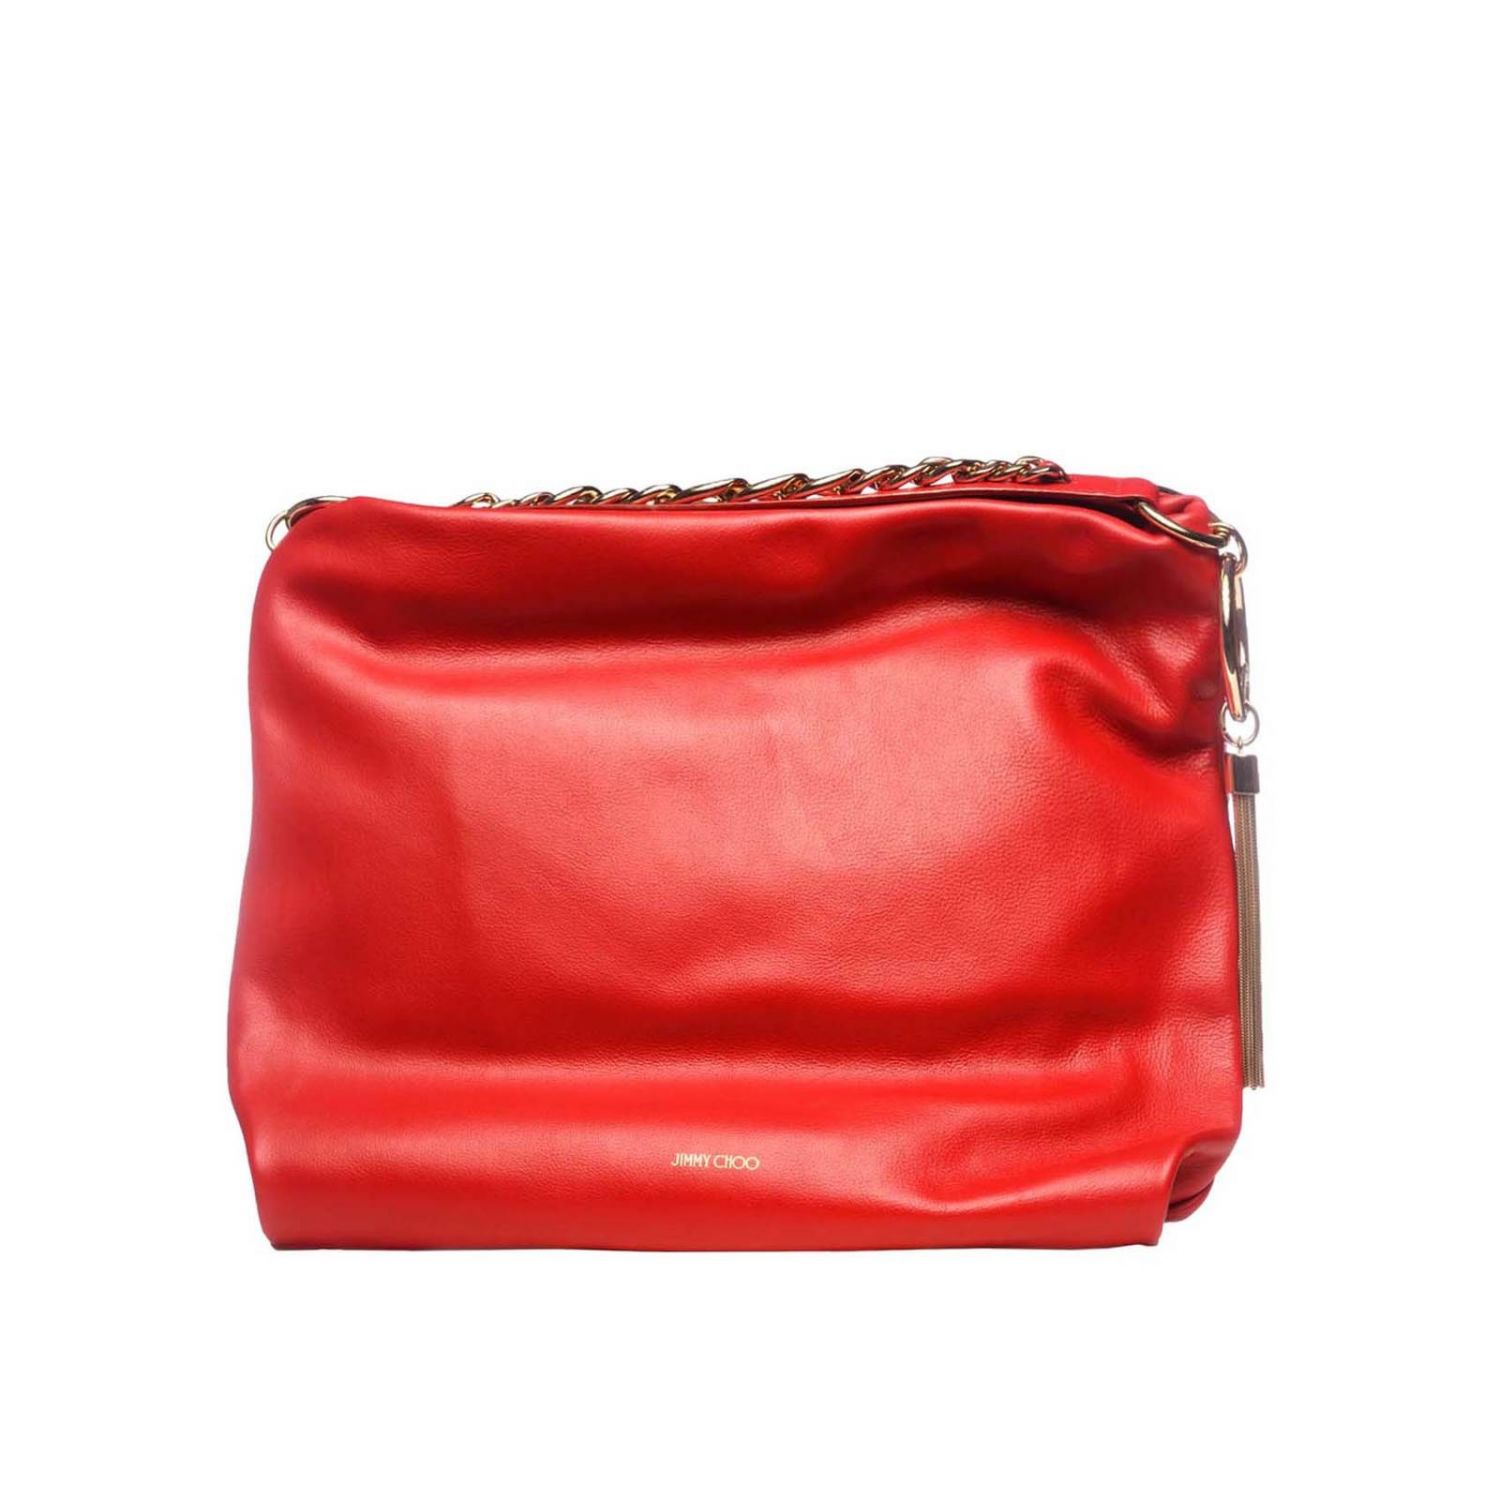 Jimmy Choo Outlet: leather bag | Tote Bags Jimmy Choo Women Red | Tote ...